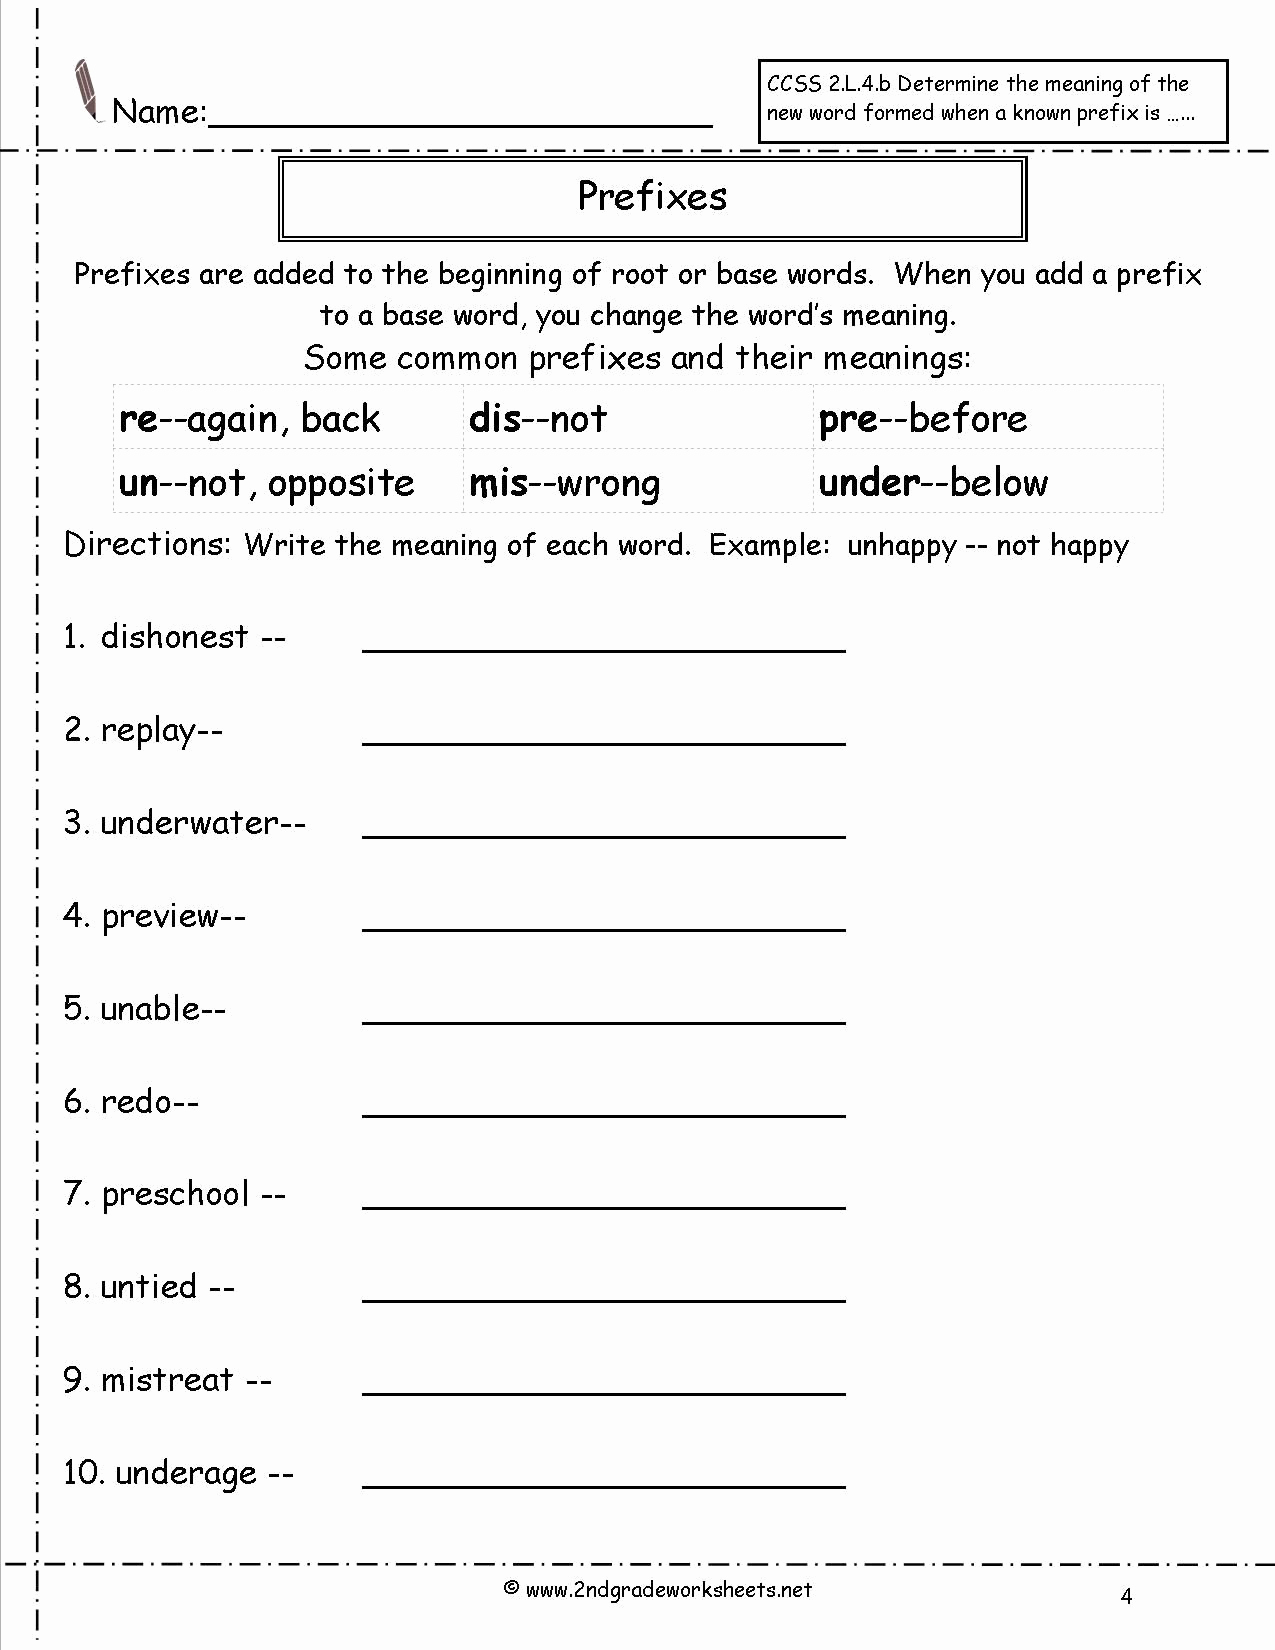 Root Word Worksheets 4th Grade Unique 20 Suffix Worksheets for 4th Grade